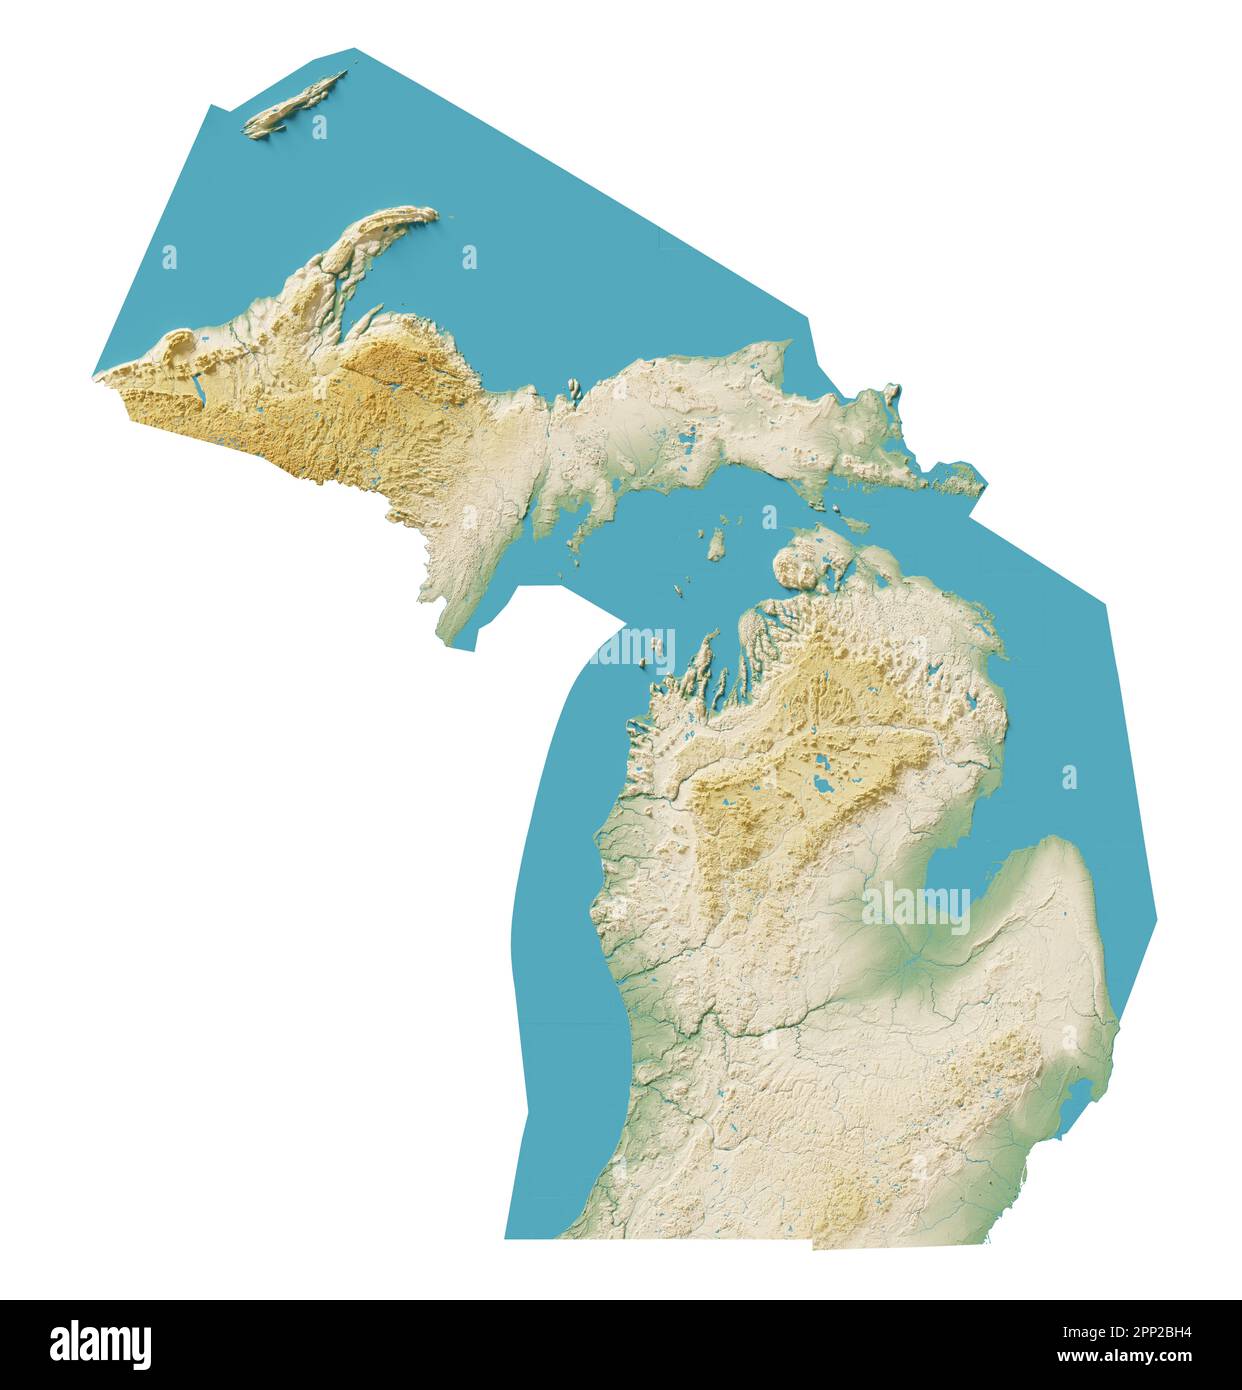 The US state of Michigan. 3D rendering of shaded relief map with  water bodies. Colored by elevation. White background. Created with satellite data. Stock Photo